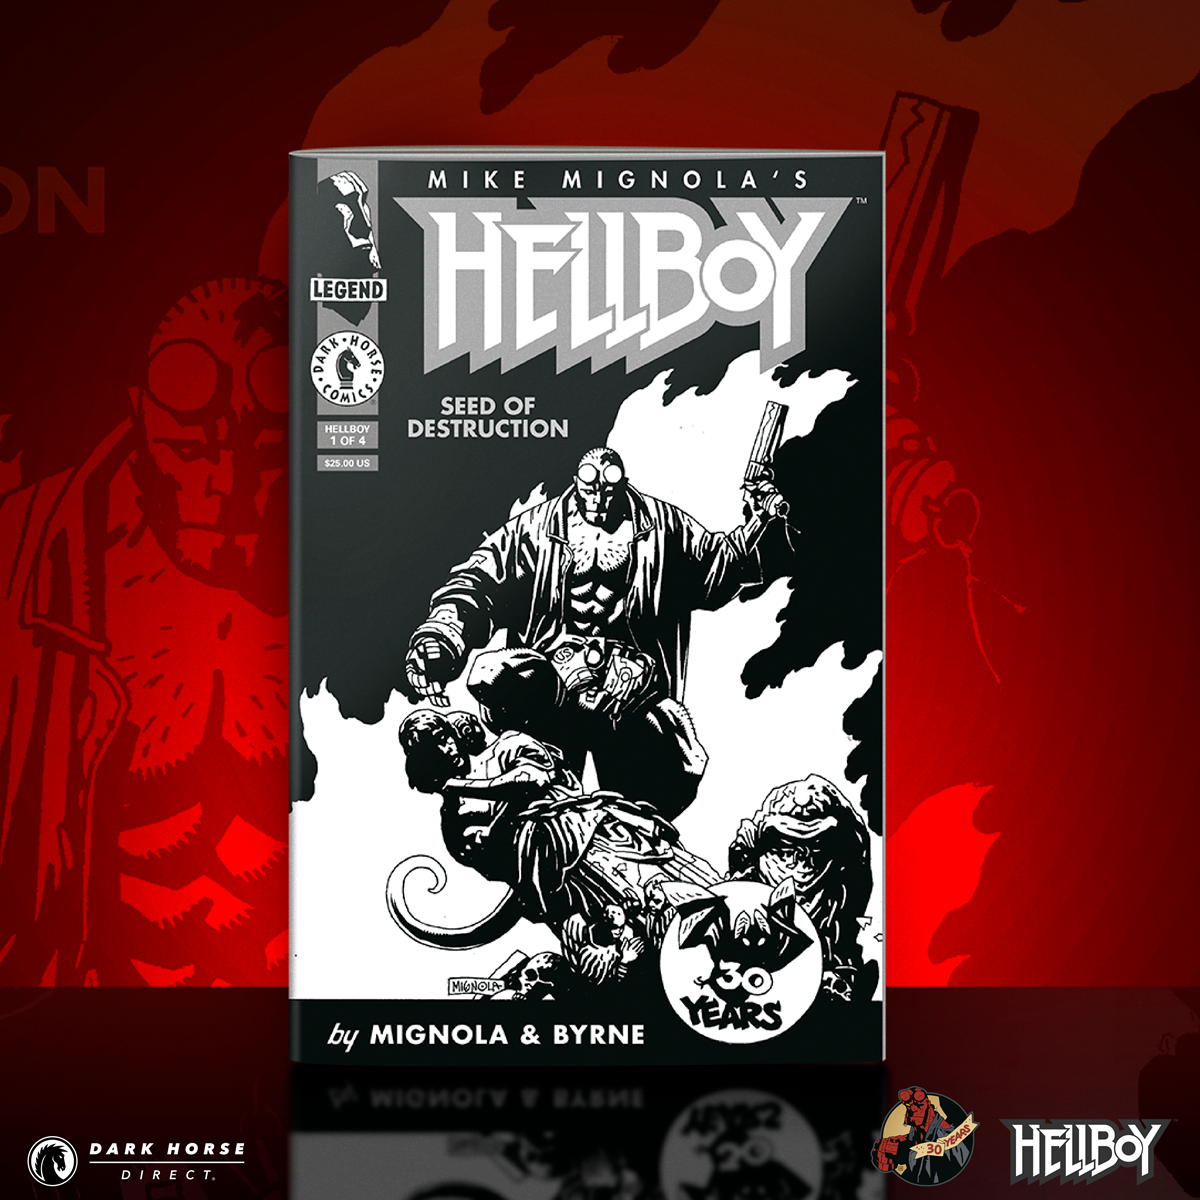 The Hellboy 30th Anniversay Seed of Destruction SDCC 2024 edition cover by Mike Mignola.